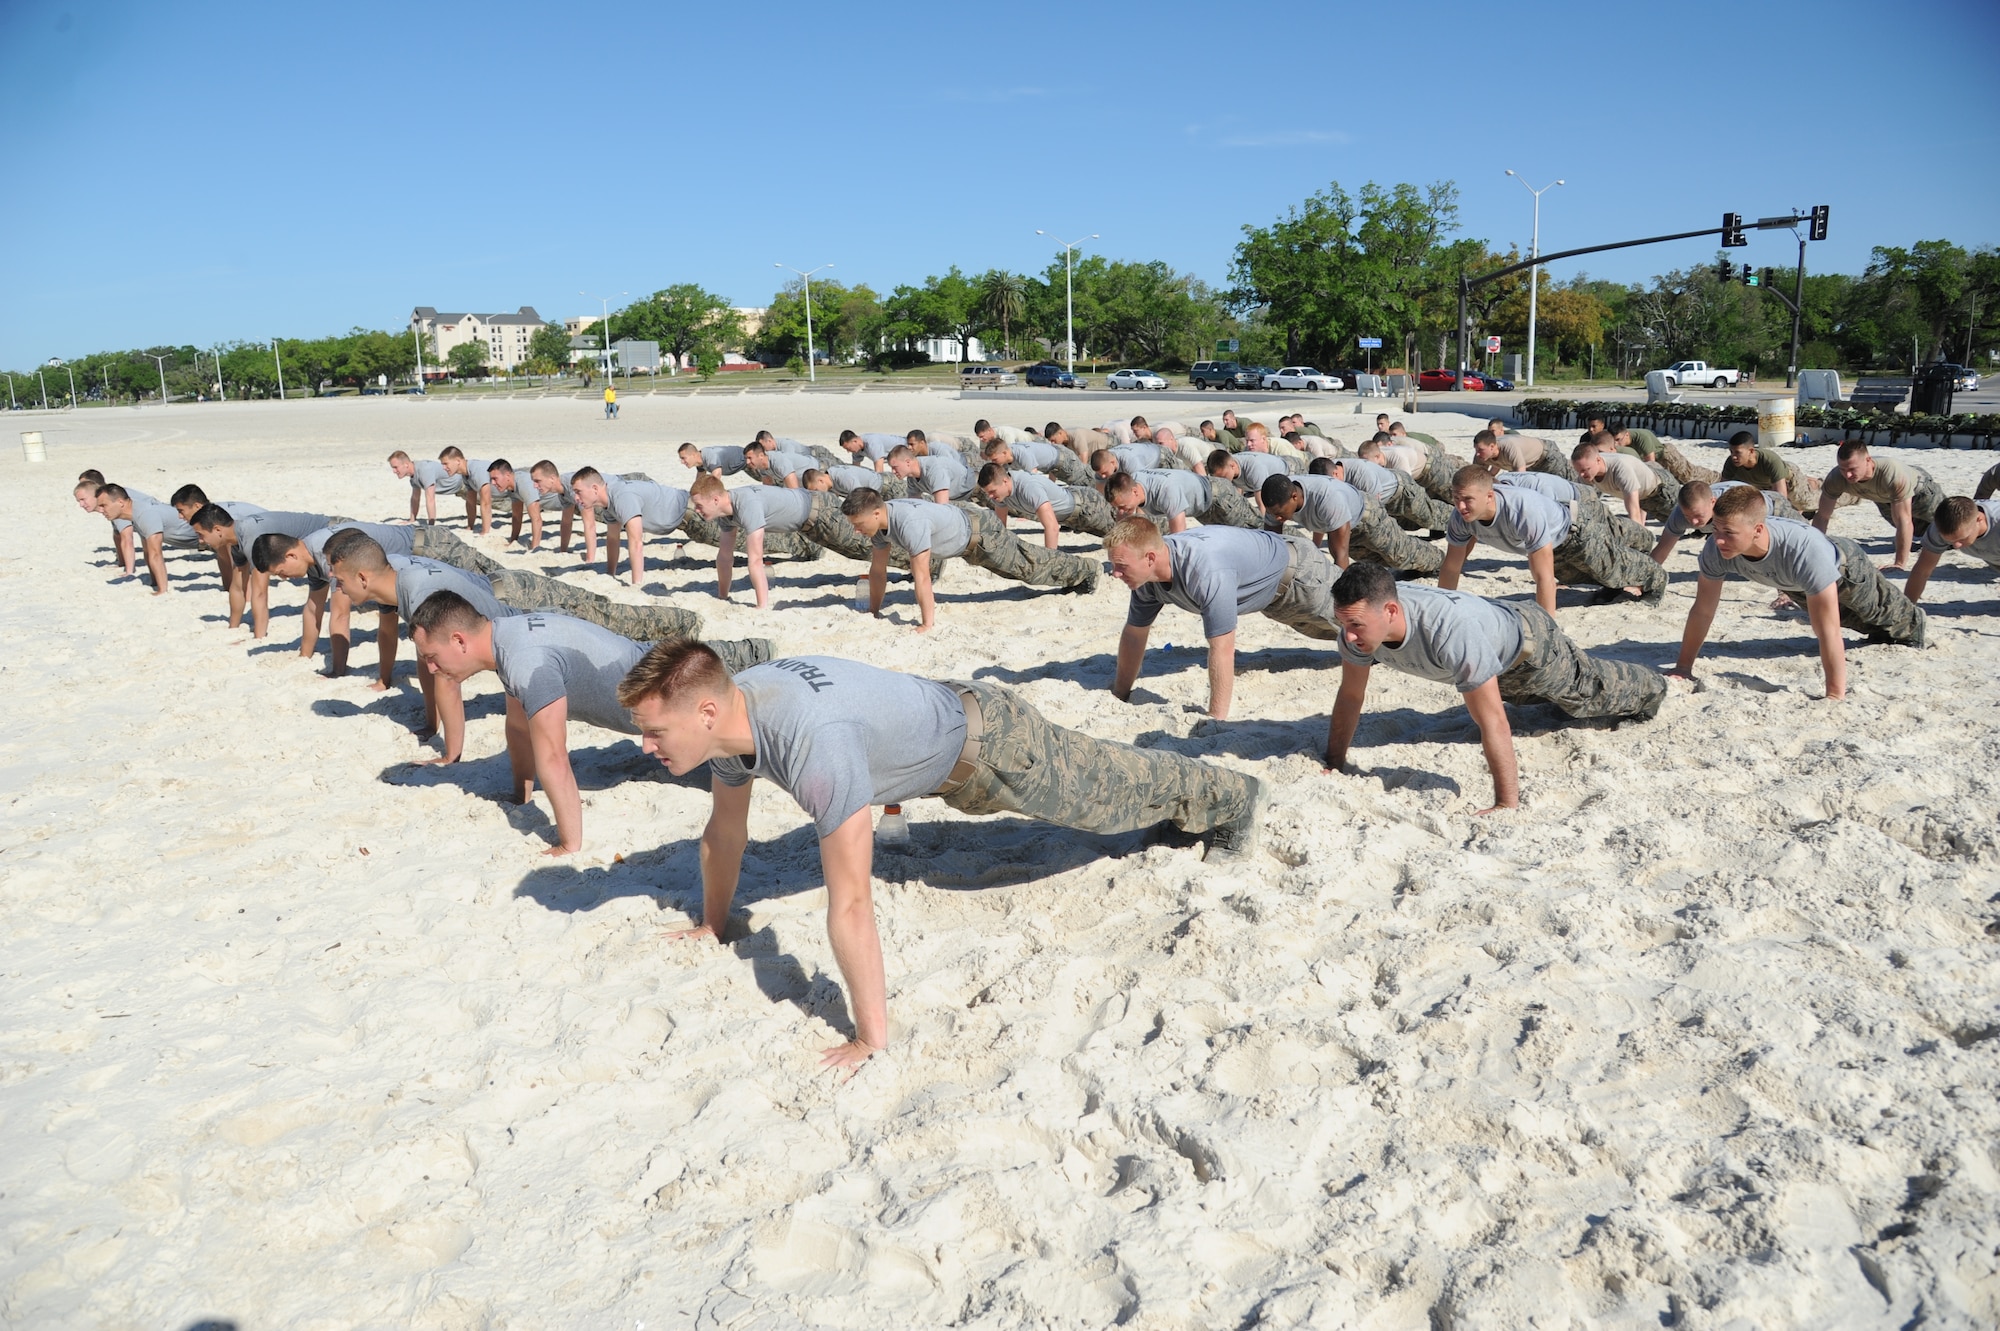 Combat control trainees from the 334th Training Squadron do push-ups during a physical training session April 12, 2013, on Biloxi beach.  Combat controllers are ground troops who are embedded with special forces teams and provide close-air support for special forces units. While at Keesler, trainees learn how to run, swim, carry a rucksack and conduct air traffic control. These Airmen are prepared physically and mentally for the demands of the combat controller pipeline while earning air traffic control certification in just 15 weeks.  (U.S. Air Force photo by Kemberly Groue)